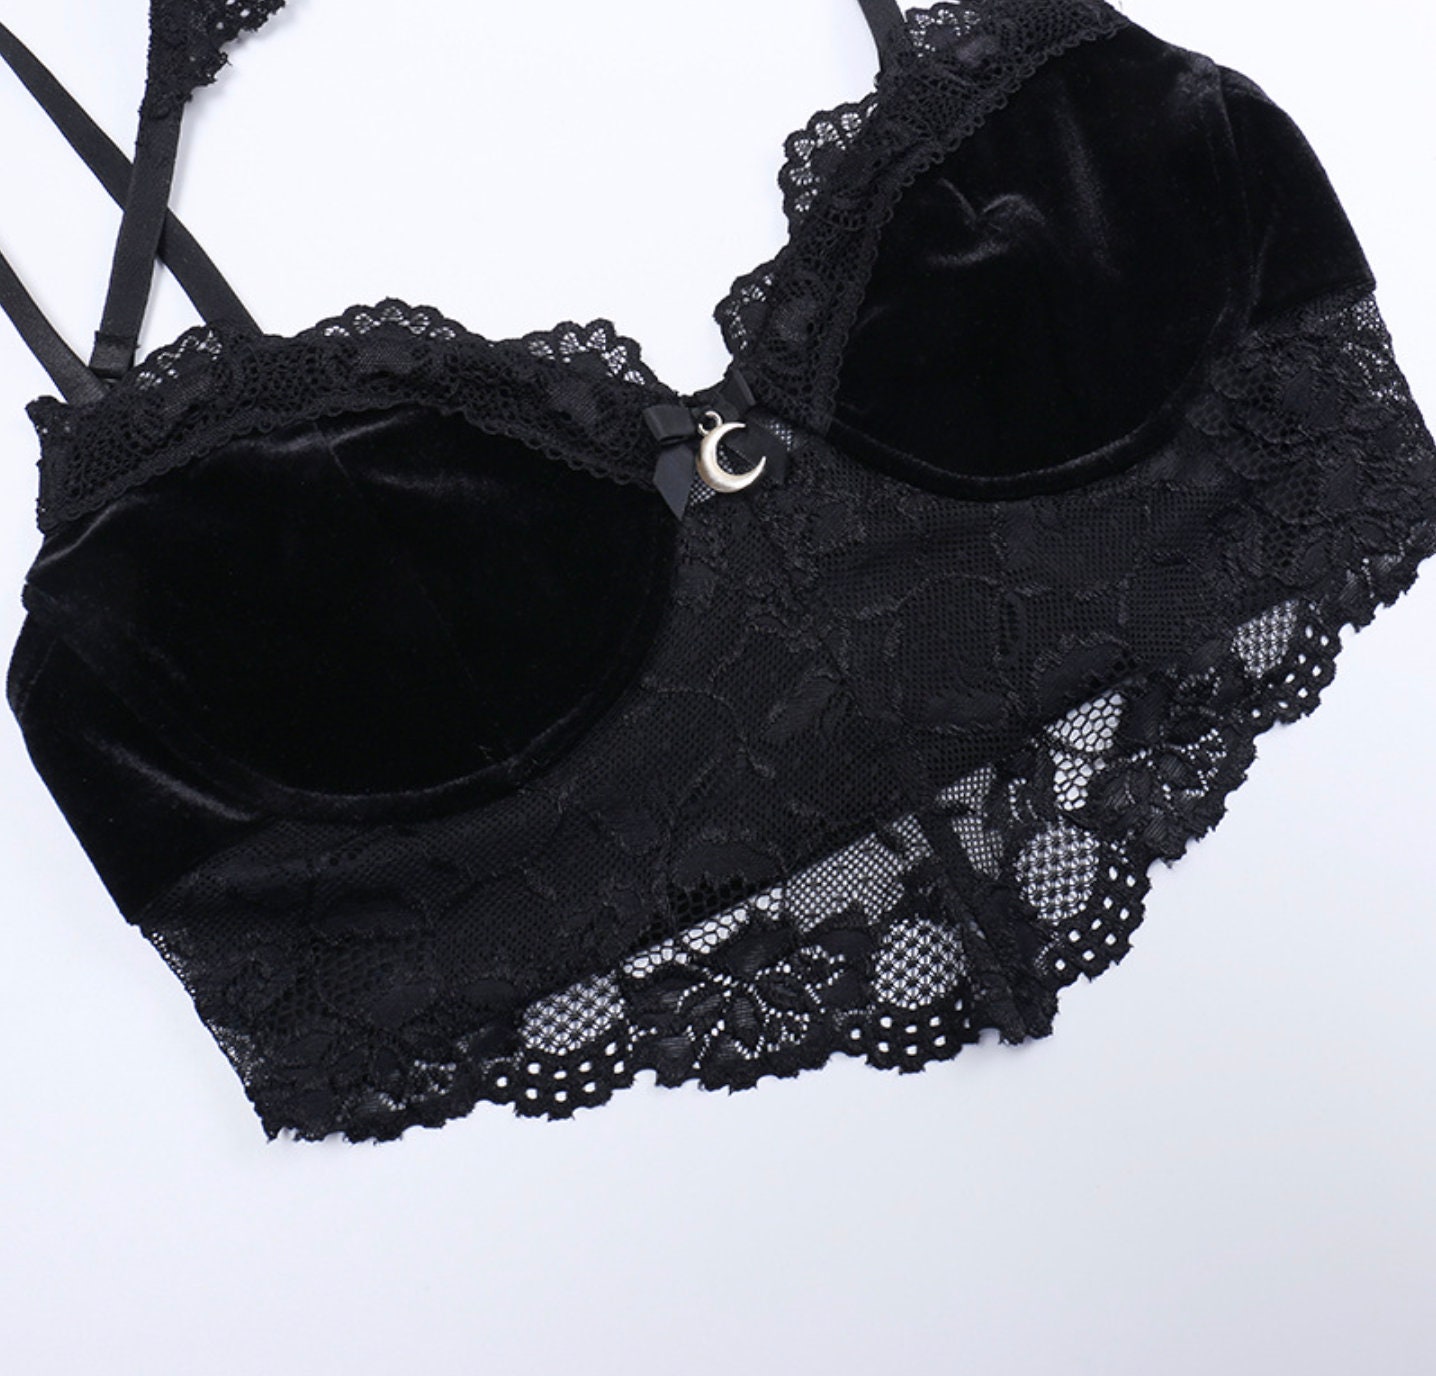 Goth Dark Velvet Lace Romantic Mall Gothic Crop Tops Women Grunge Aesthetic Bodycon Halter Camis Black Backless Summer Busiters  # 227